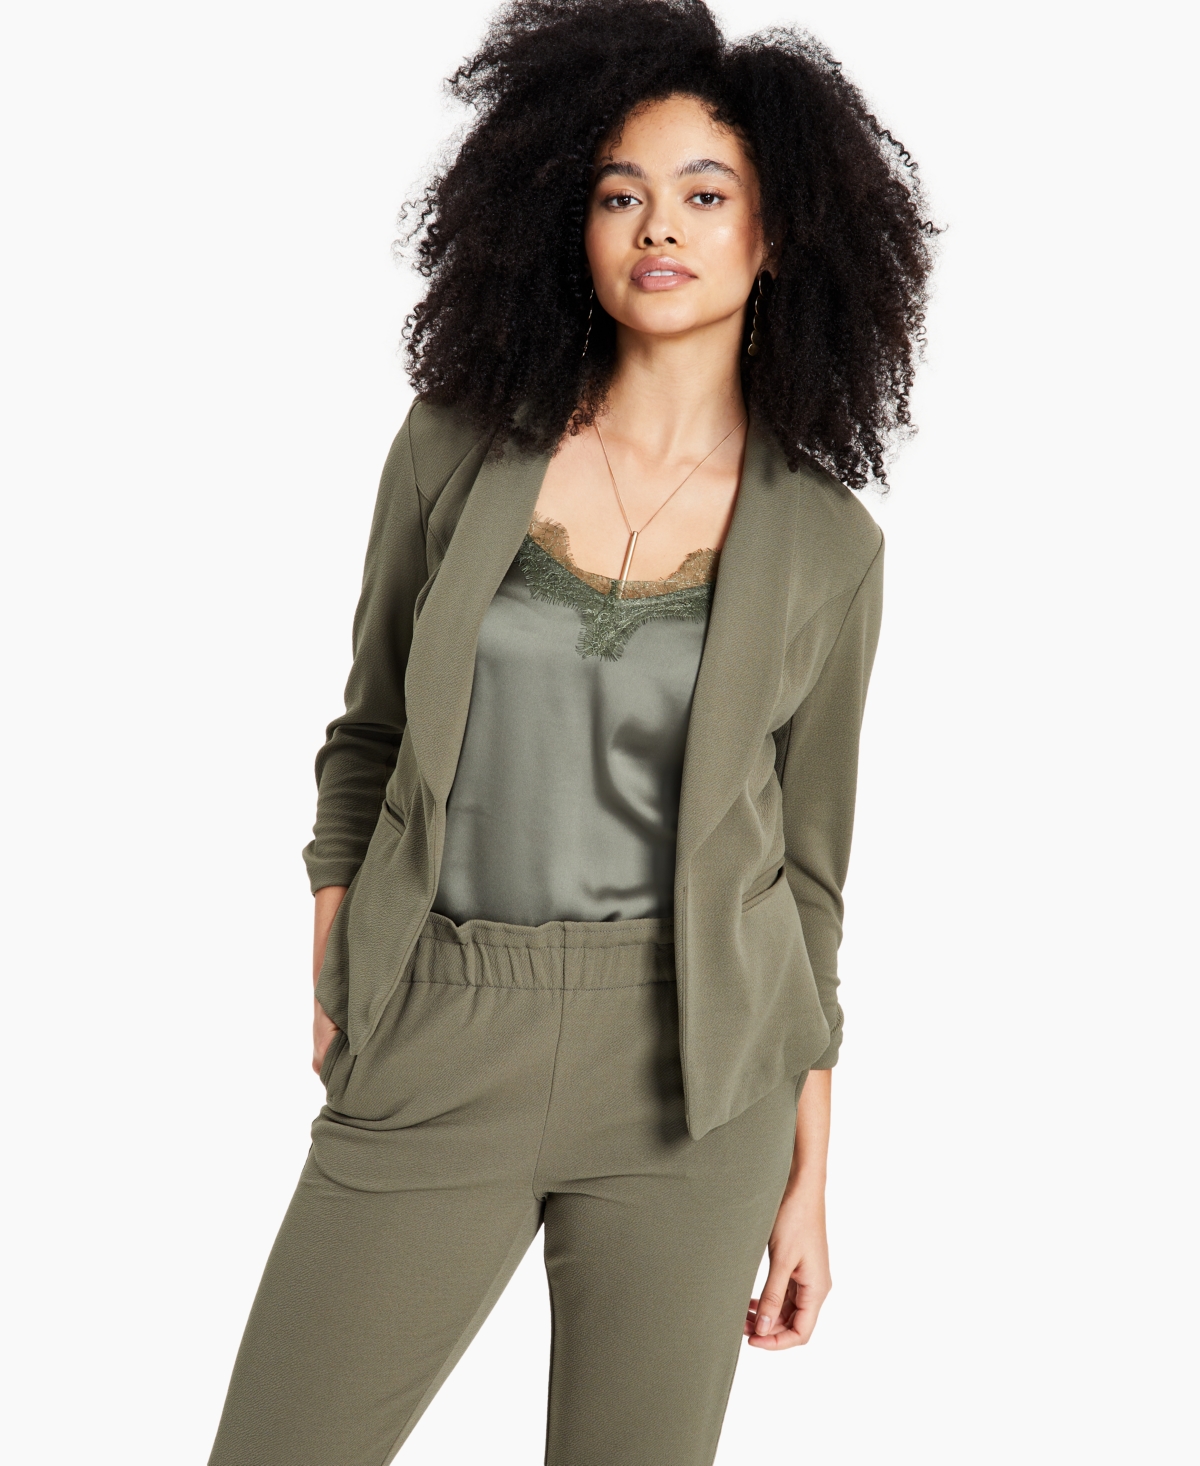 Bar Iii Knit-Crepe Ruched-Sleeve Blazer, Created for Macy's